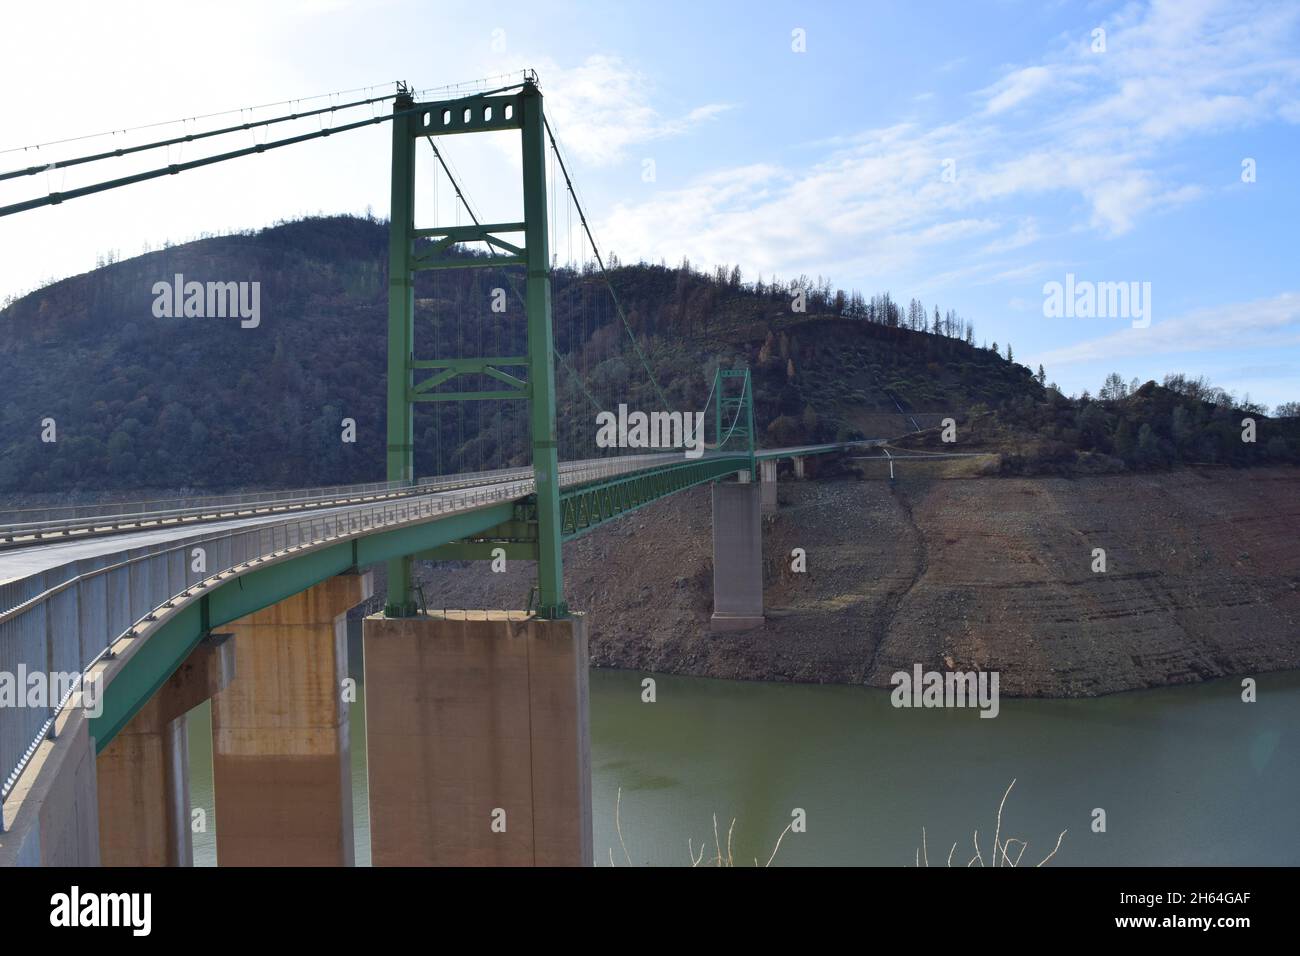 View of the Bidwell Bar Bridge, a steel suspension bridge built in 1965 and spans an arm of Lake Oroville. Stock Photo